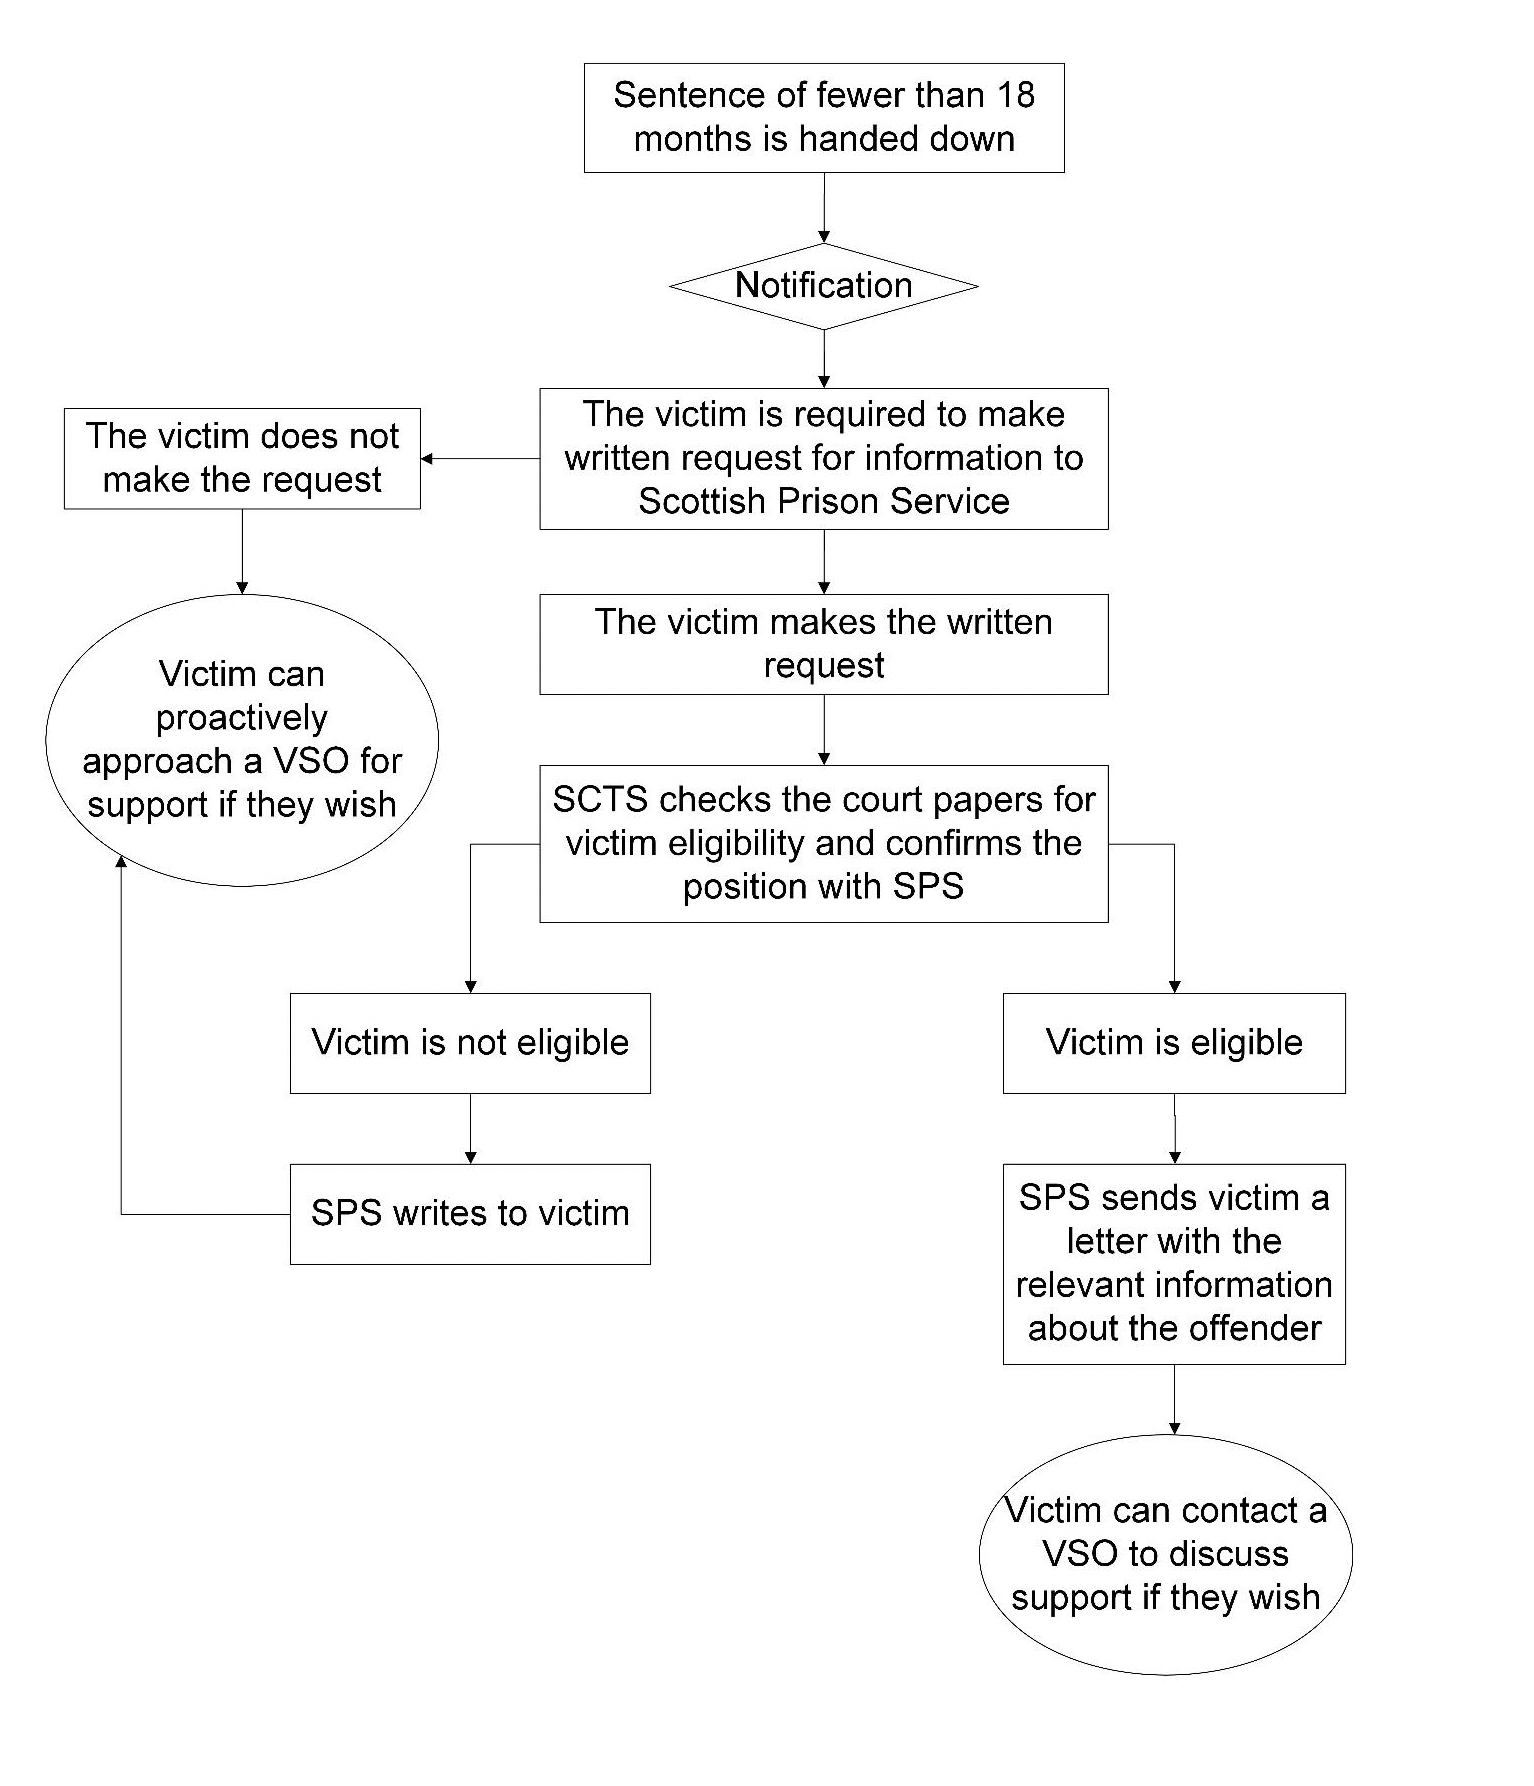 This is a process map for current victim notification where an offender has been sentenced to fewer than 18 months in prison. 
The victim is only able to ask SPS in writing for information. If they do that, SPS will check court papers to make sure the victim is eligible to receive information. If the victim is not eligible, SPS will write to tell them. In this situation, or if the victim decides not to request information, the victim can choose to contact a VSO for support. 
If the victim is eligible, SPS will send them a letter with the relevant information about the offender. The victim can choose to contact a VSO to discuss support.
